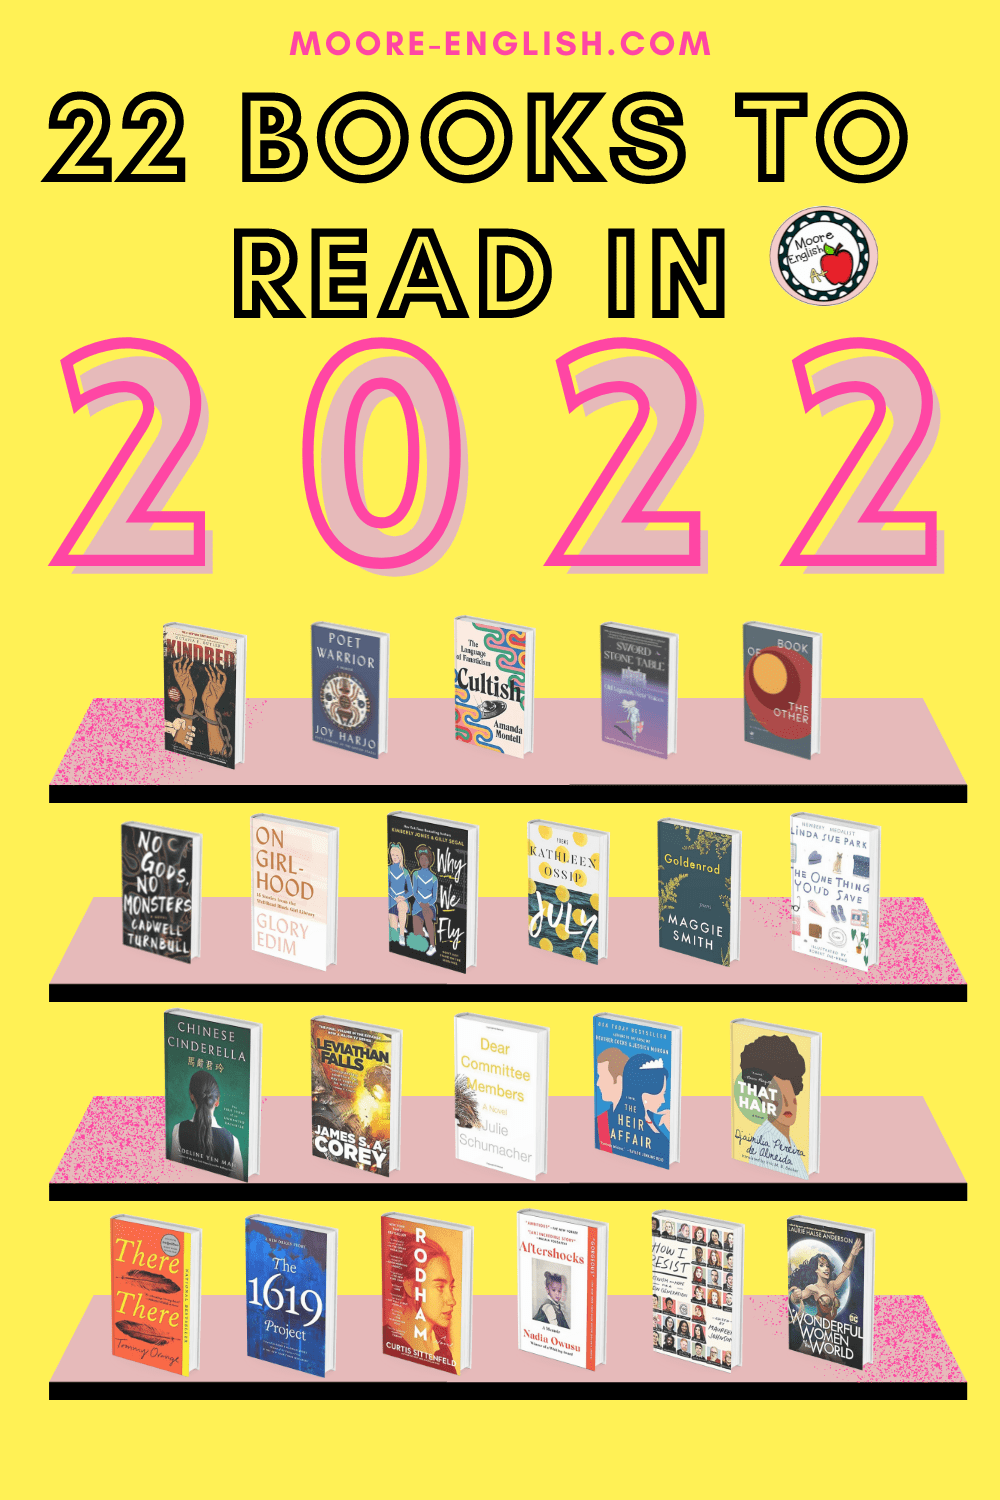 22 Exciting and Enlightening Books to Read in 2022 / Moore English